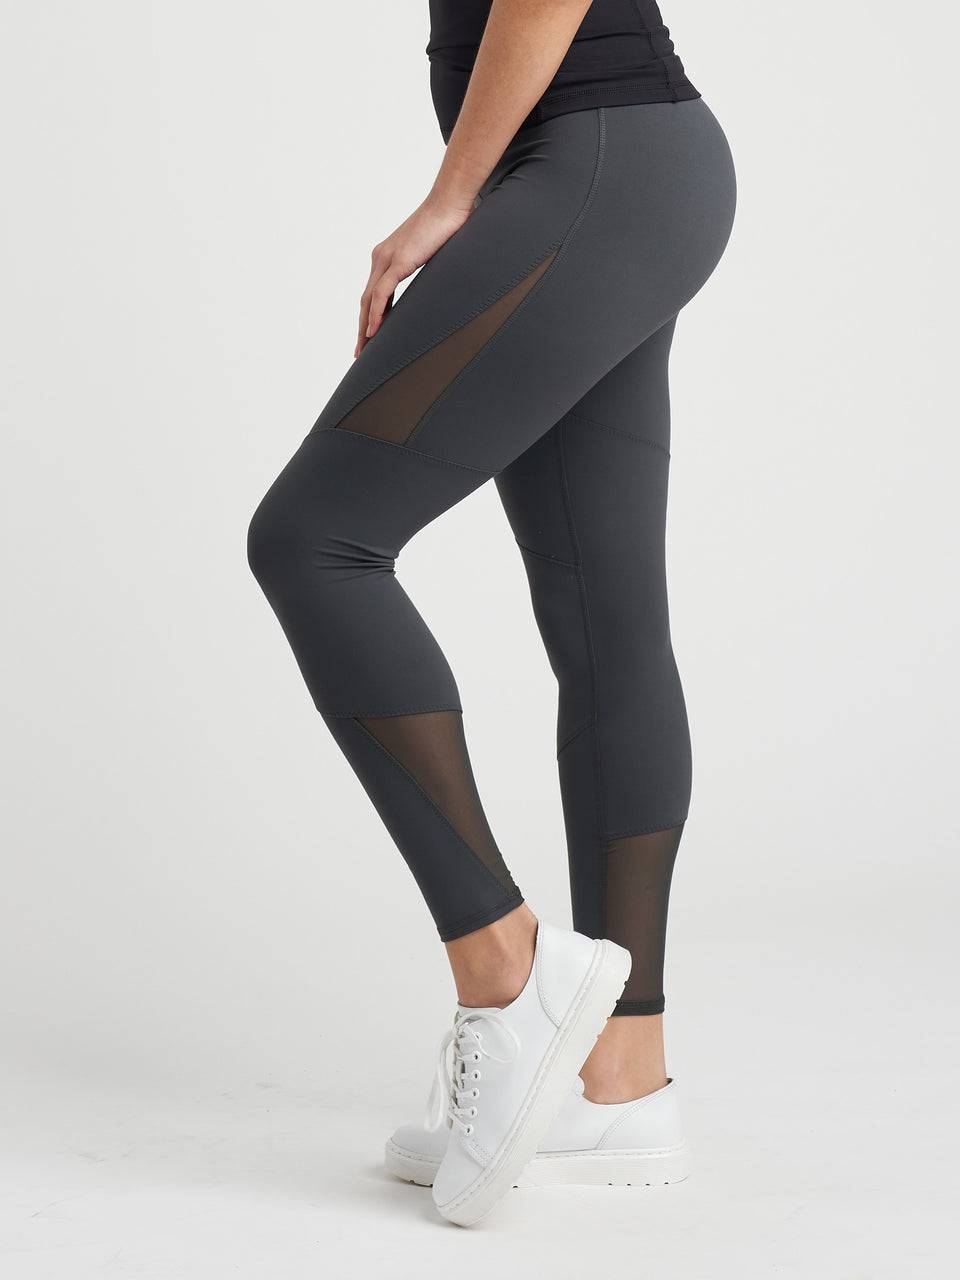 L'espace Low-Waisted Capri Leggings with Mesh Panels and